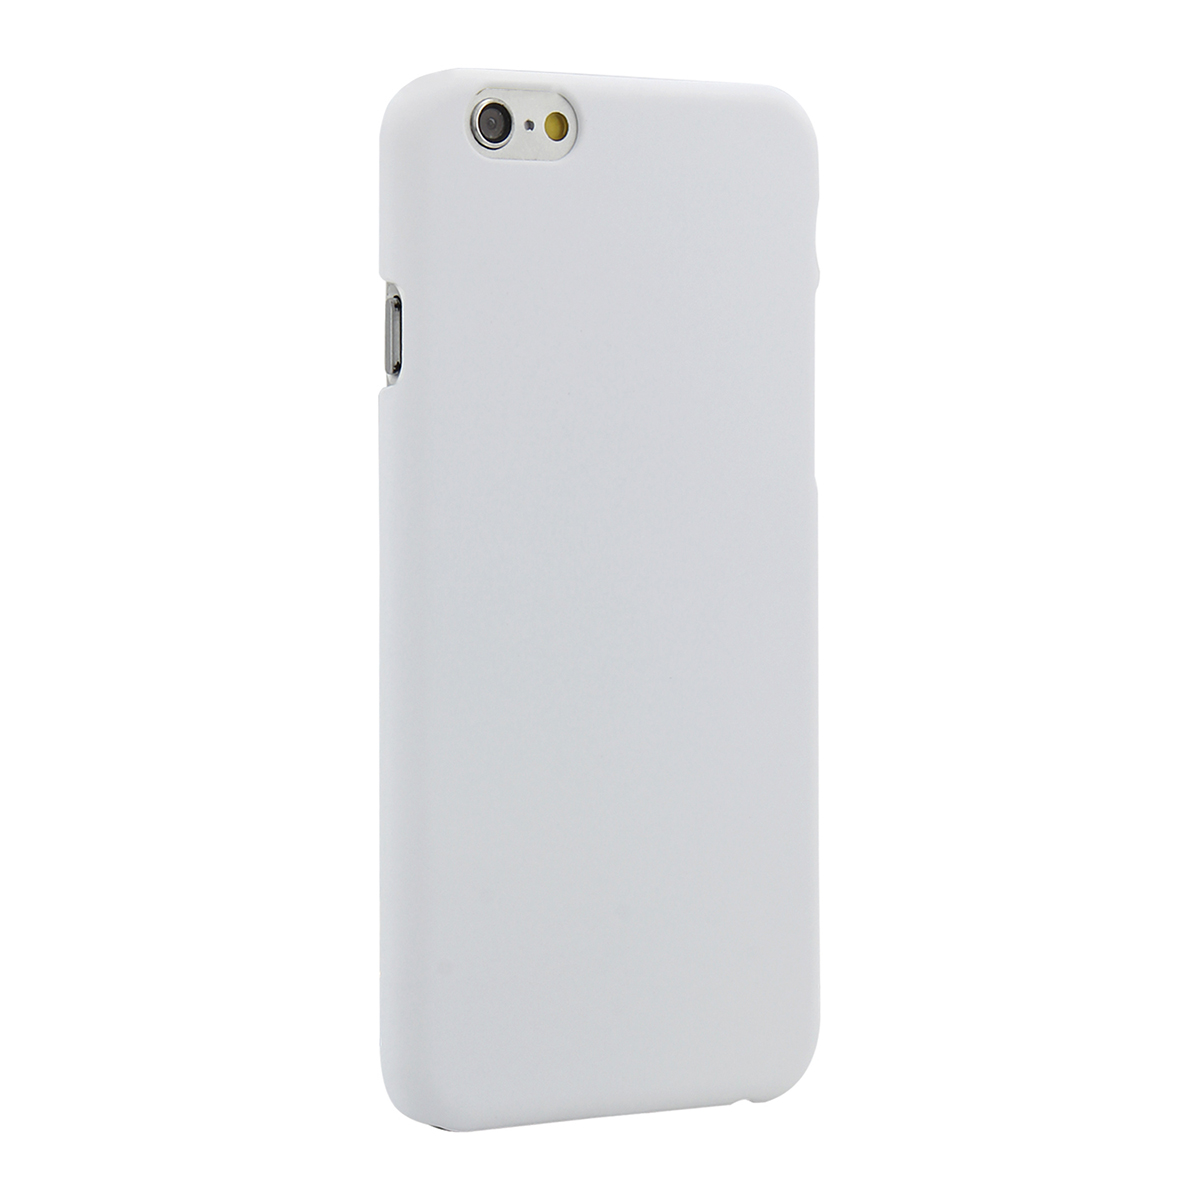 Multicolor Frosted Hard PC Protective Back Phone Case for iPhone 6s Plus - White